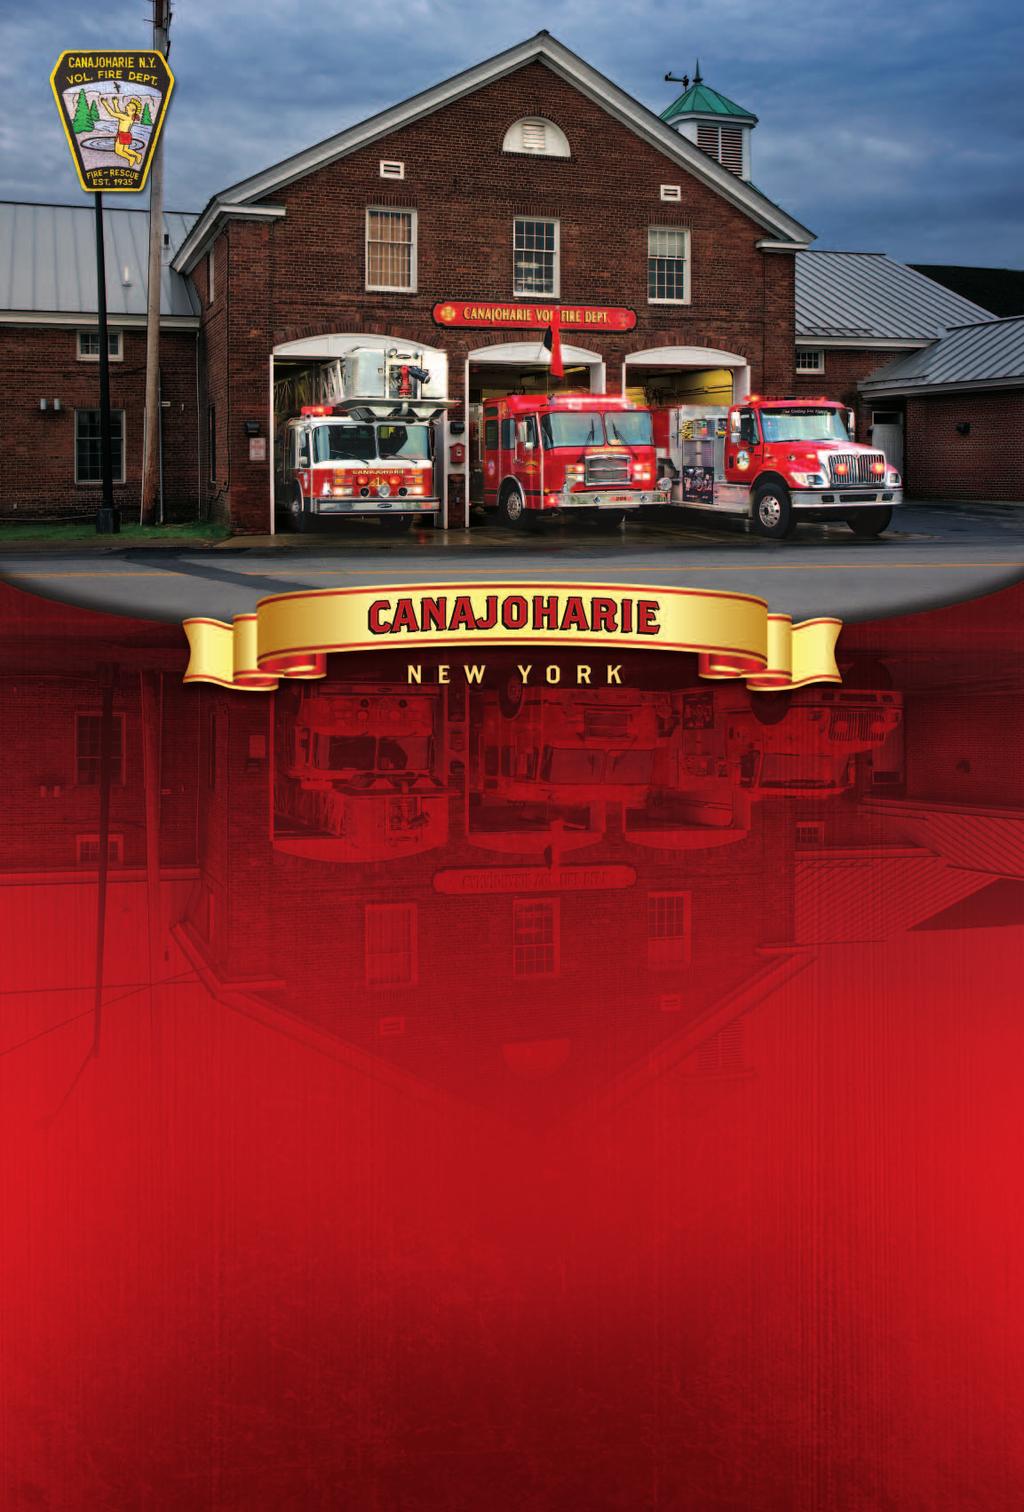 Canajoharie Volunteer Fire Department Proudly Serving the Canajoharie Community Since 1935 SEPTEMBER AUGUS T 1 2 3 4 5 6 7 8 9 10 11 12 13 14 15 16 17 18 19 20 21 22 23 24 25 26 27 28 29 30 31 OC